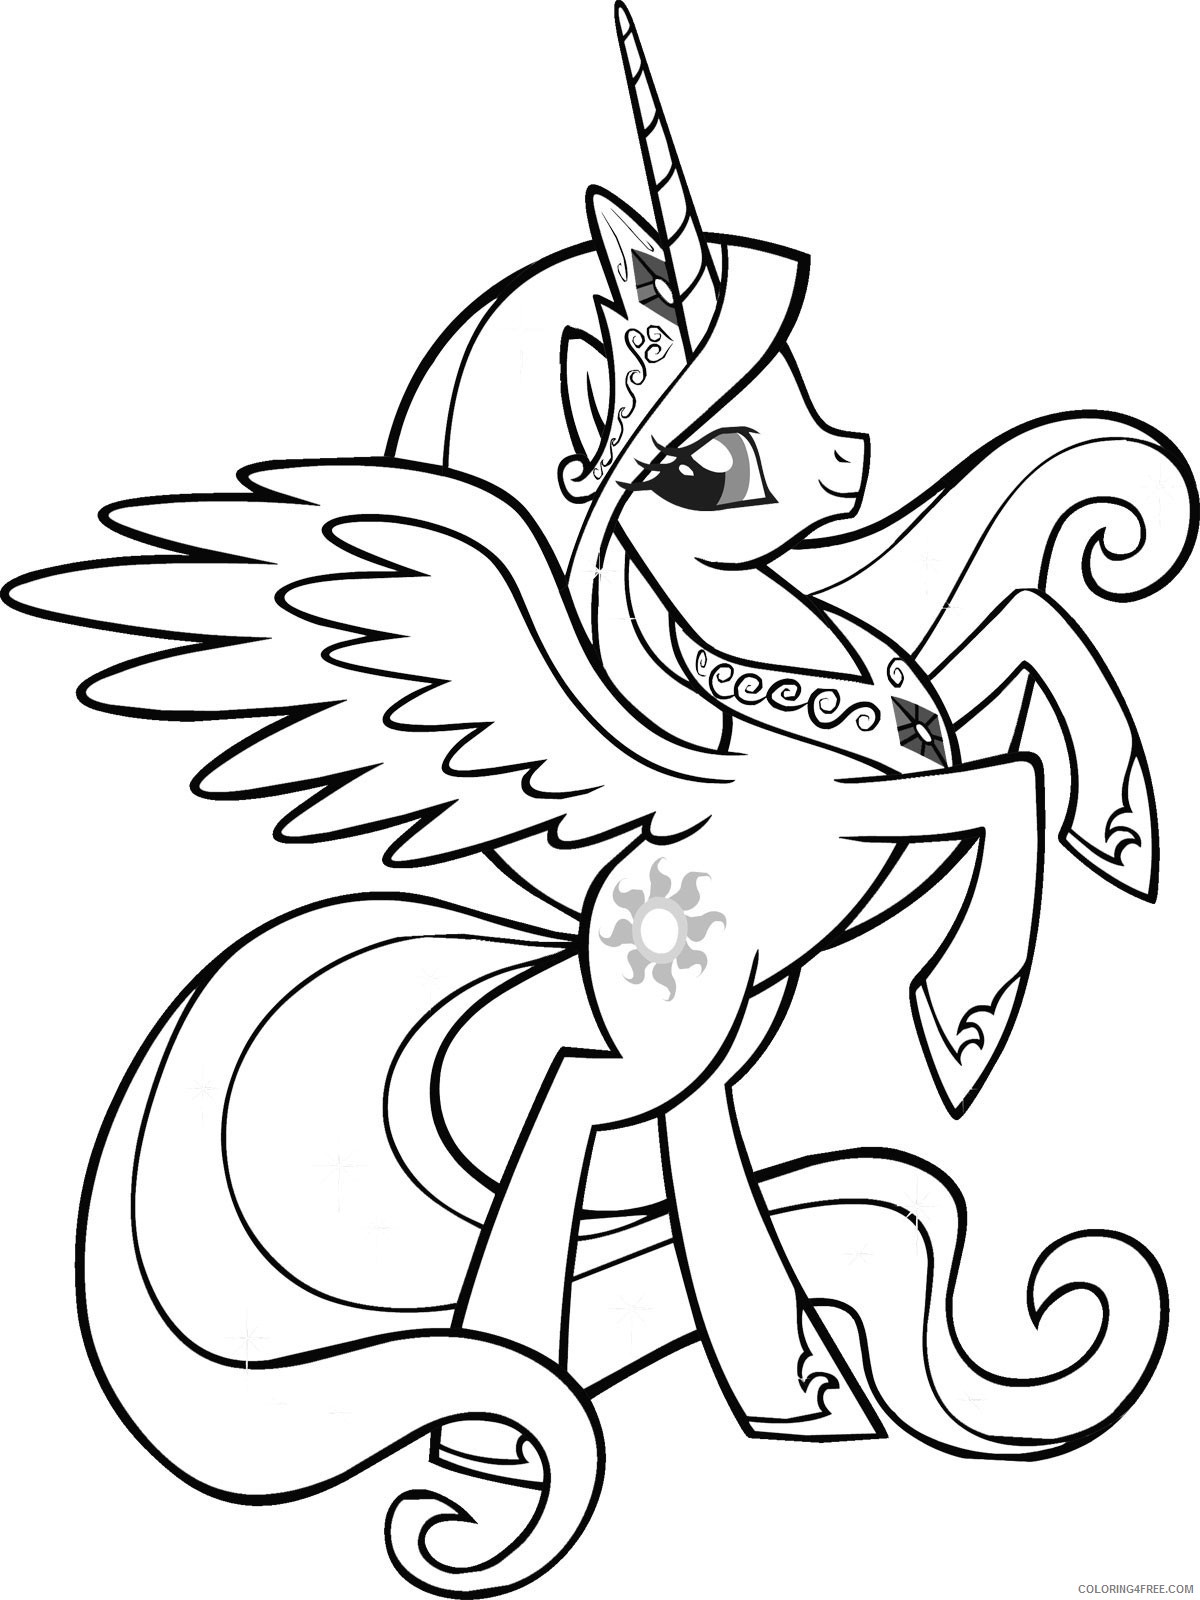 My Little Pony Coloring Pages Cartoons My Little Pony Celestia Printable 2020 4503 Coloring4free